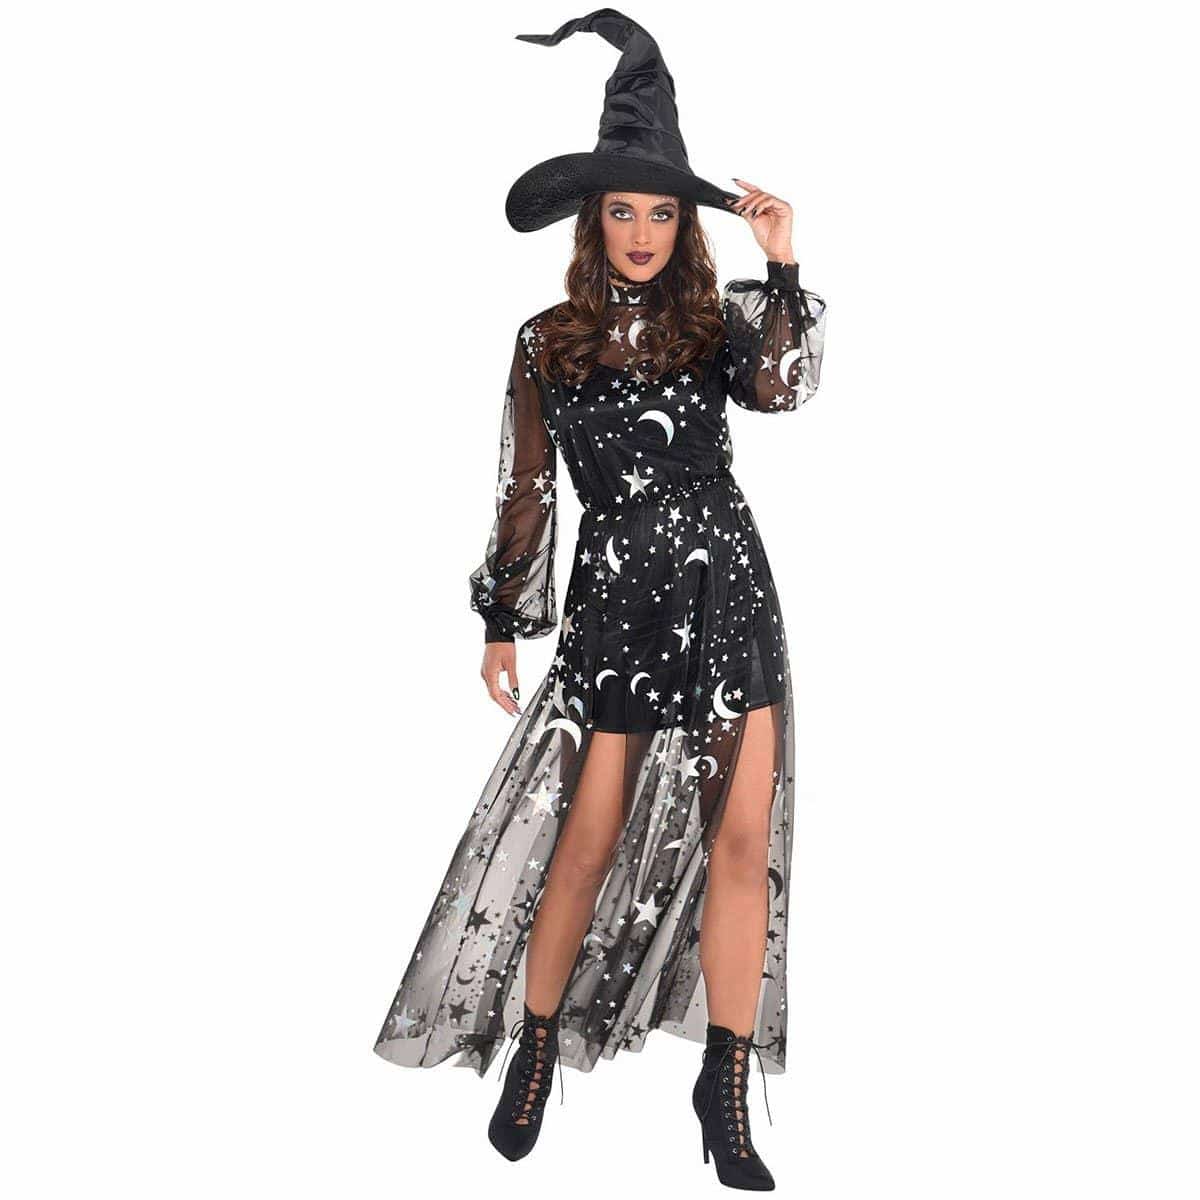 Buy Costume Accessories Celestial Dress for Adults sold at Party Expert